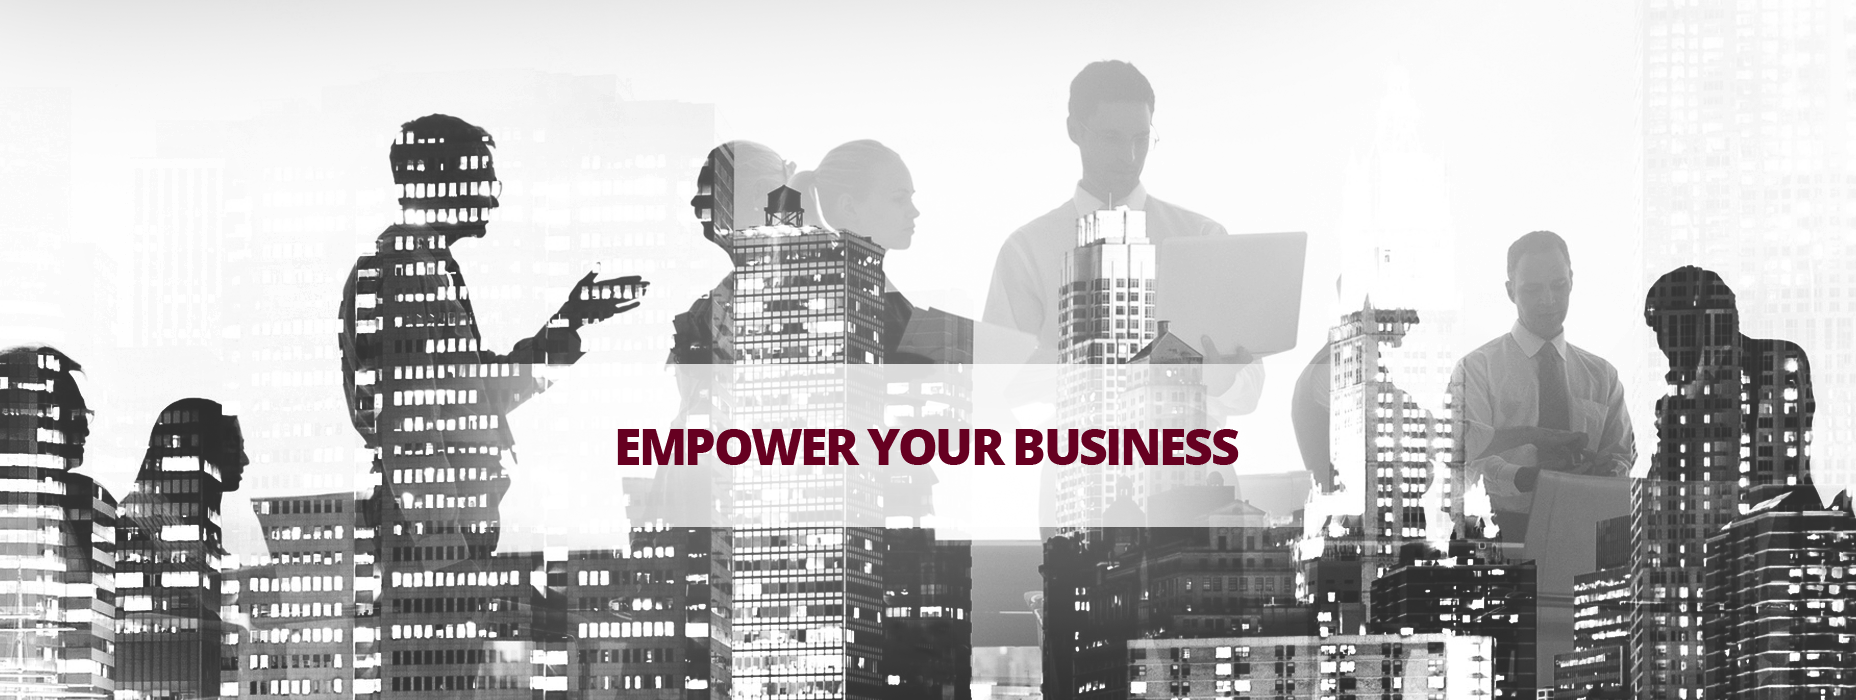 Empower your business